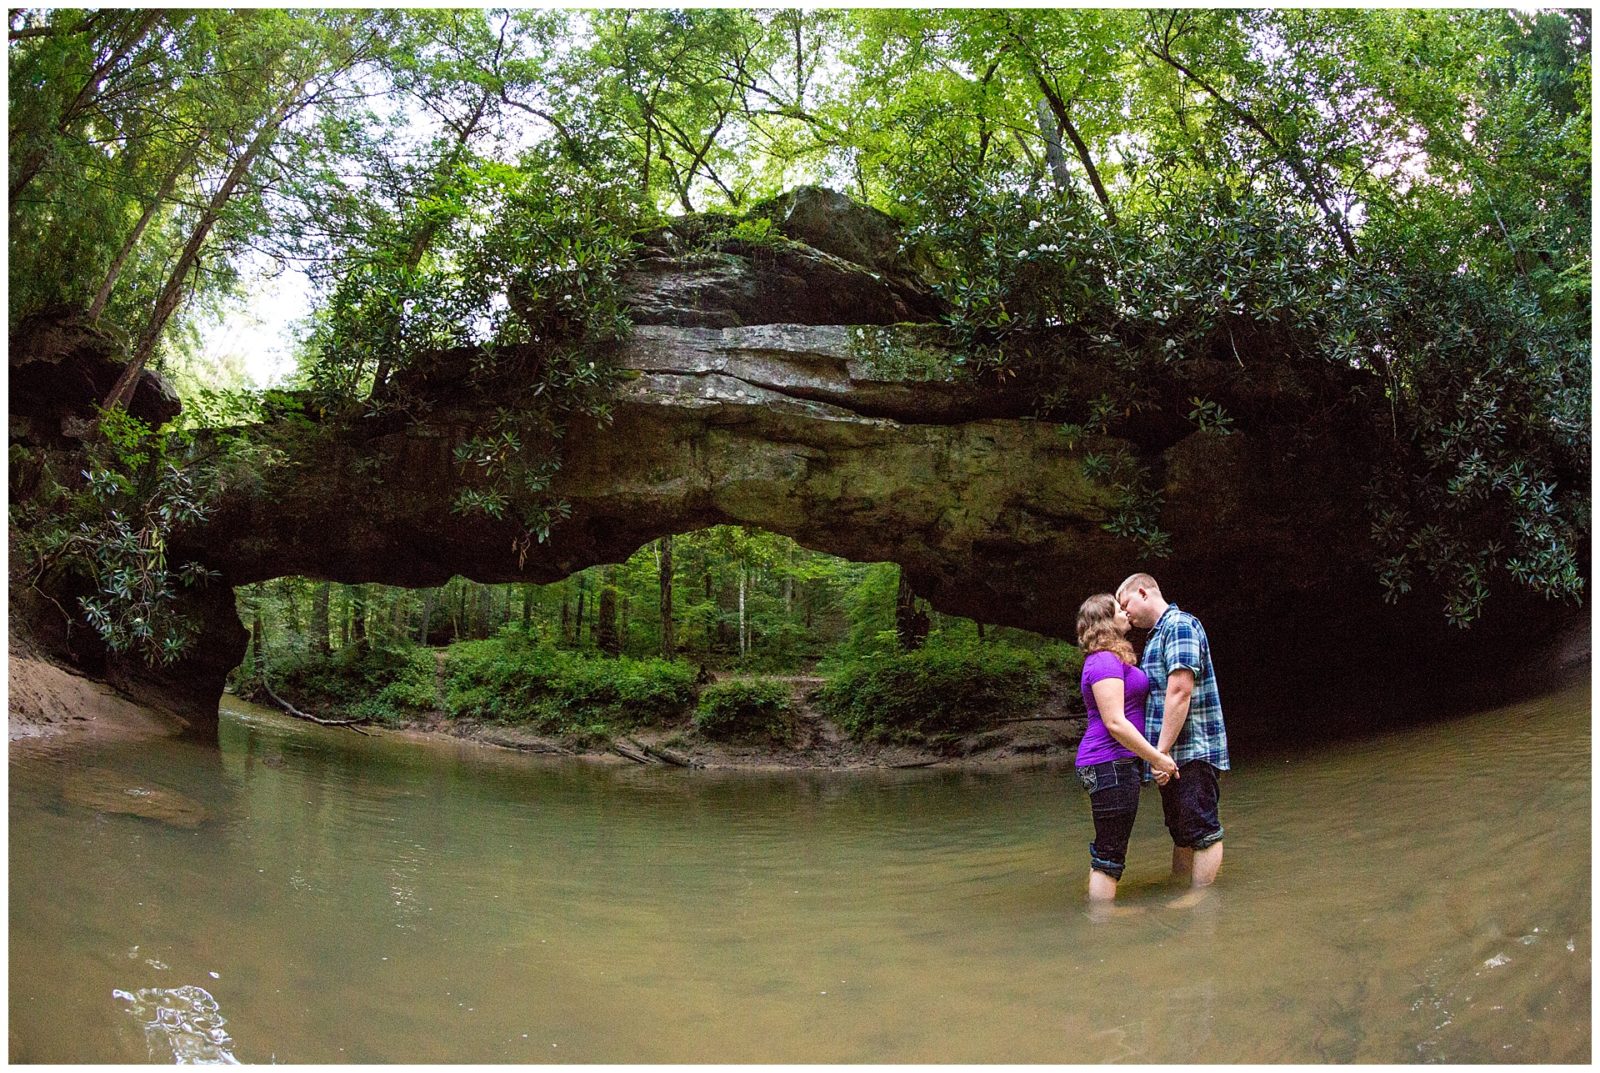 Adventurous Red River Gorge engagement session filled with rock climbing, a waterfall & a beautiful arch formation all in the lovely state of Kentucky. Photo by: Kevin and Anna Photography www.kevinandannaweddings.com